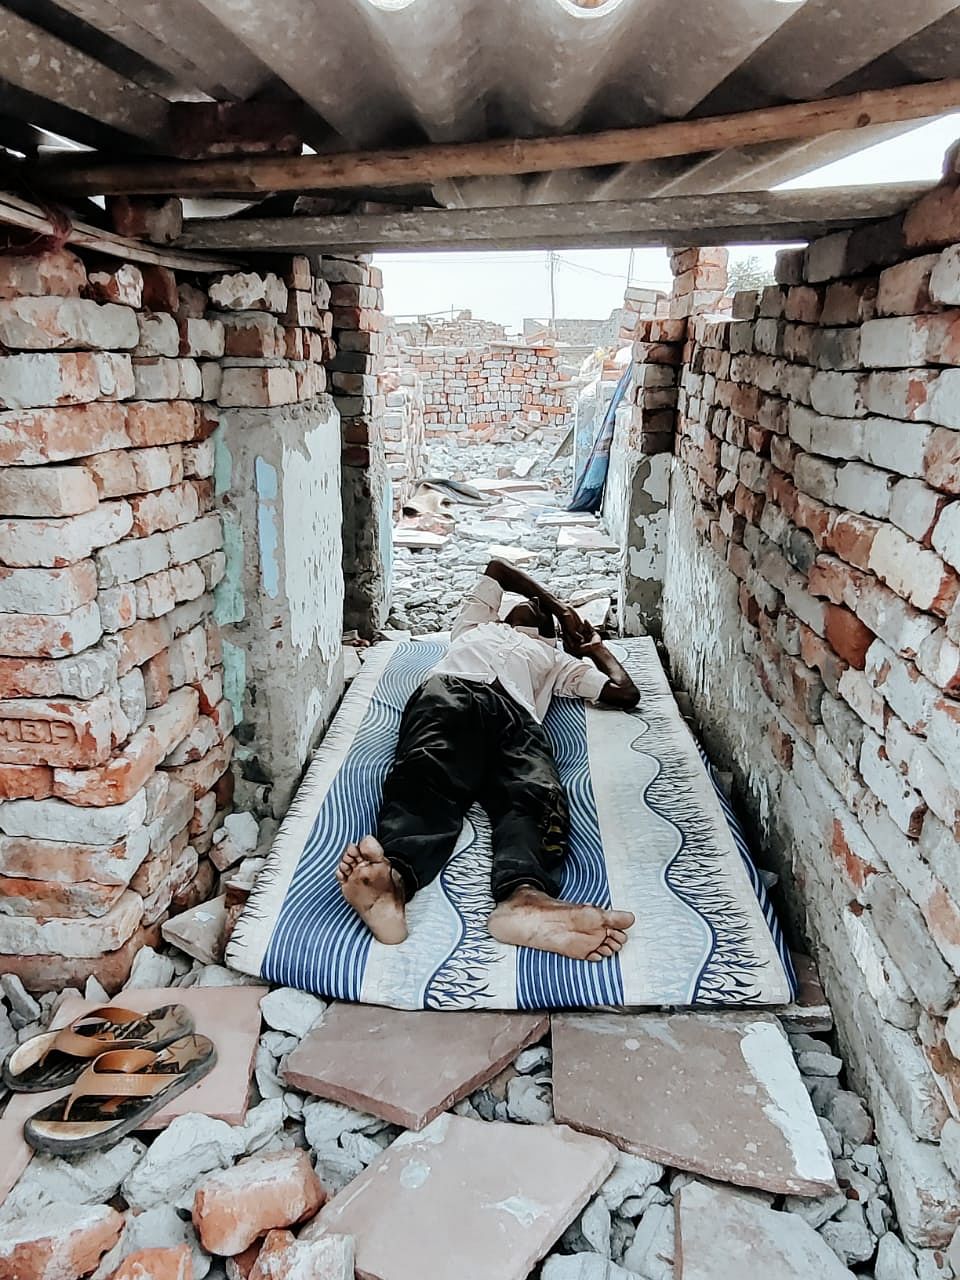 A resident sleeps in what remains of his house | Shubhangi Misra | ThePrint